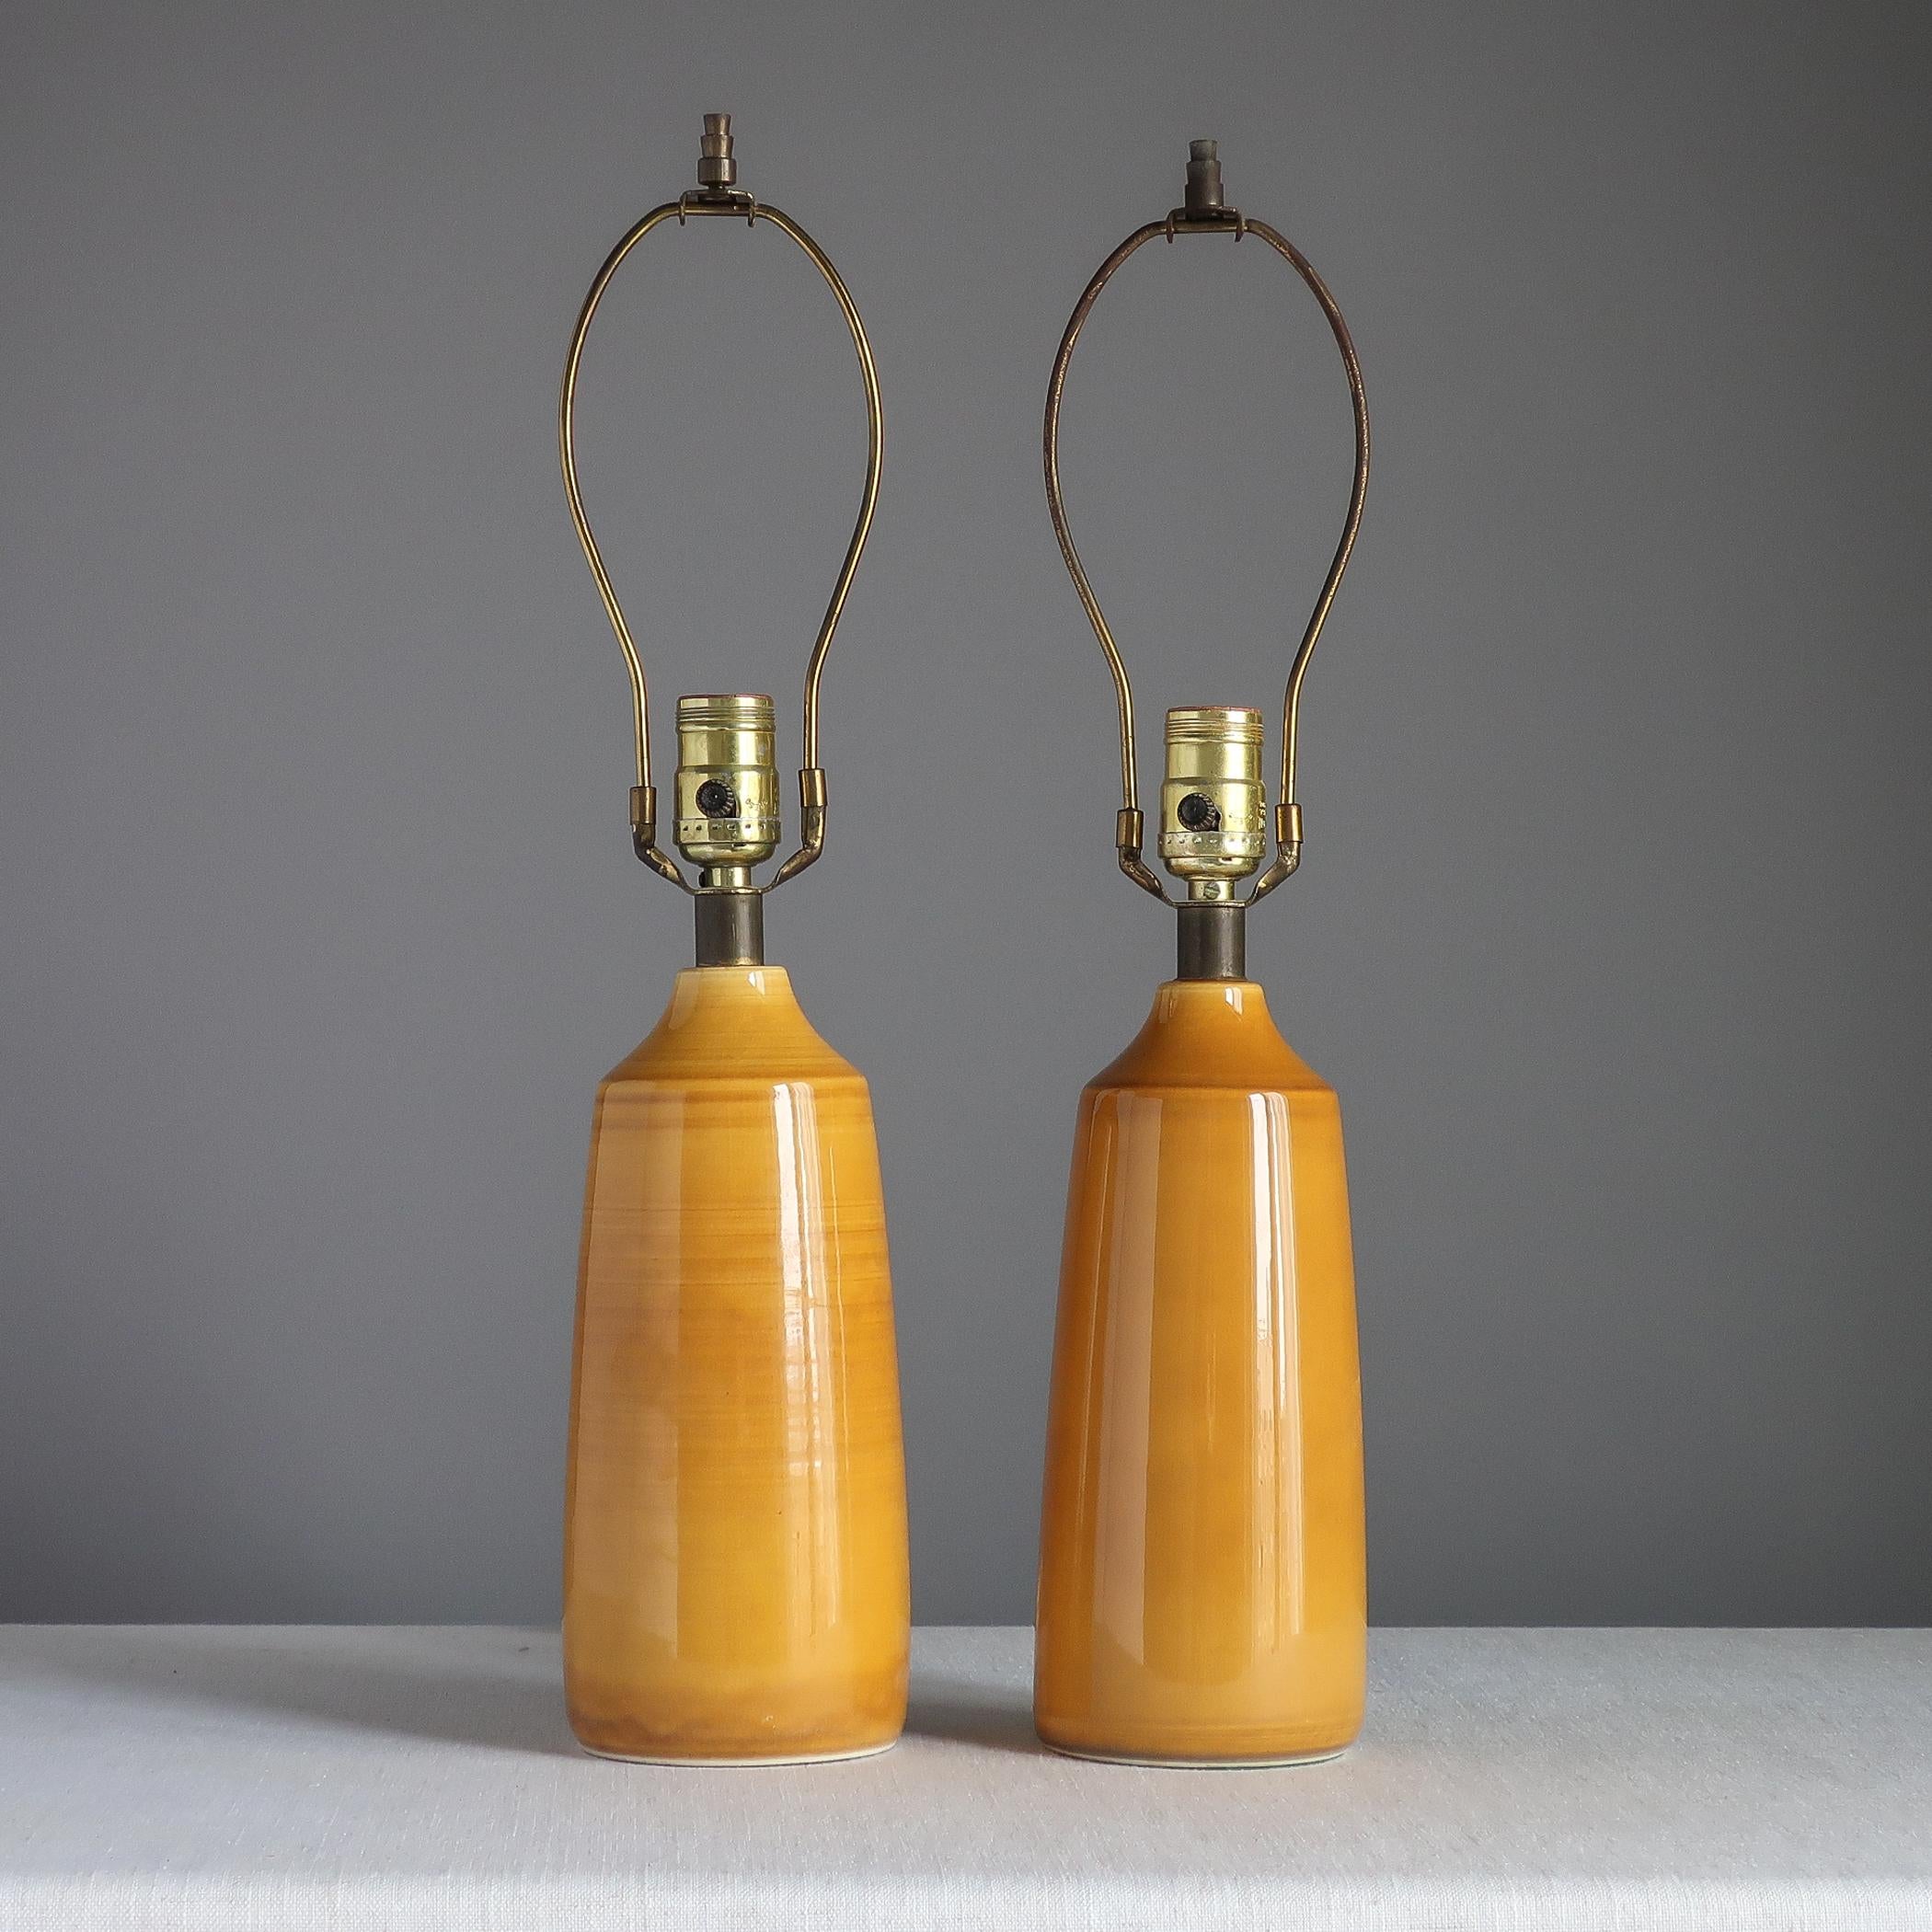 Pair of midcentury ceramic table lamps designed by Canadian/Danish couple Lotte and Gunnar Bostlund. Each simple stoneware body has a mustard-y yellow glaze. Bostlund label around cord hole at rear. 

Each ceramic base measures 10 inches high to top